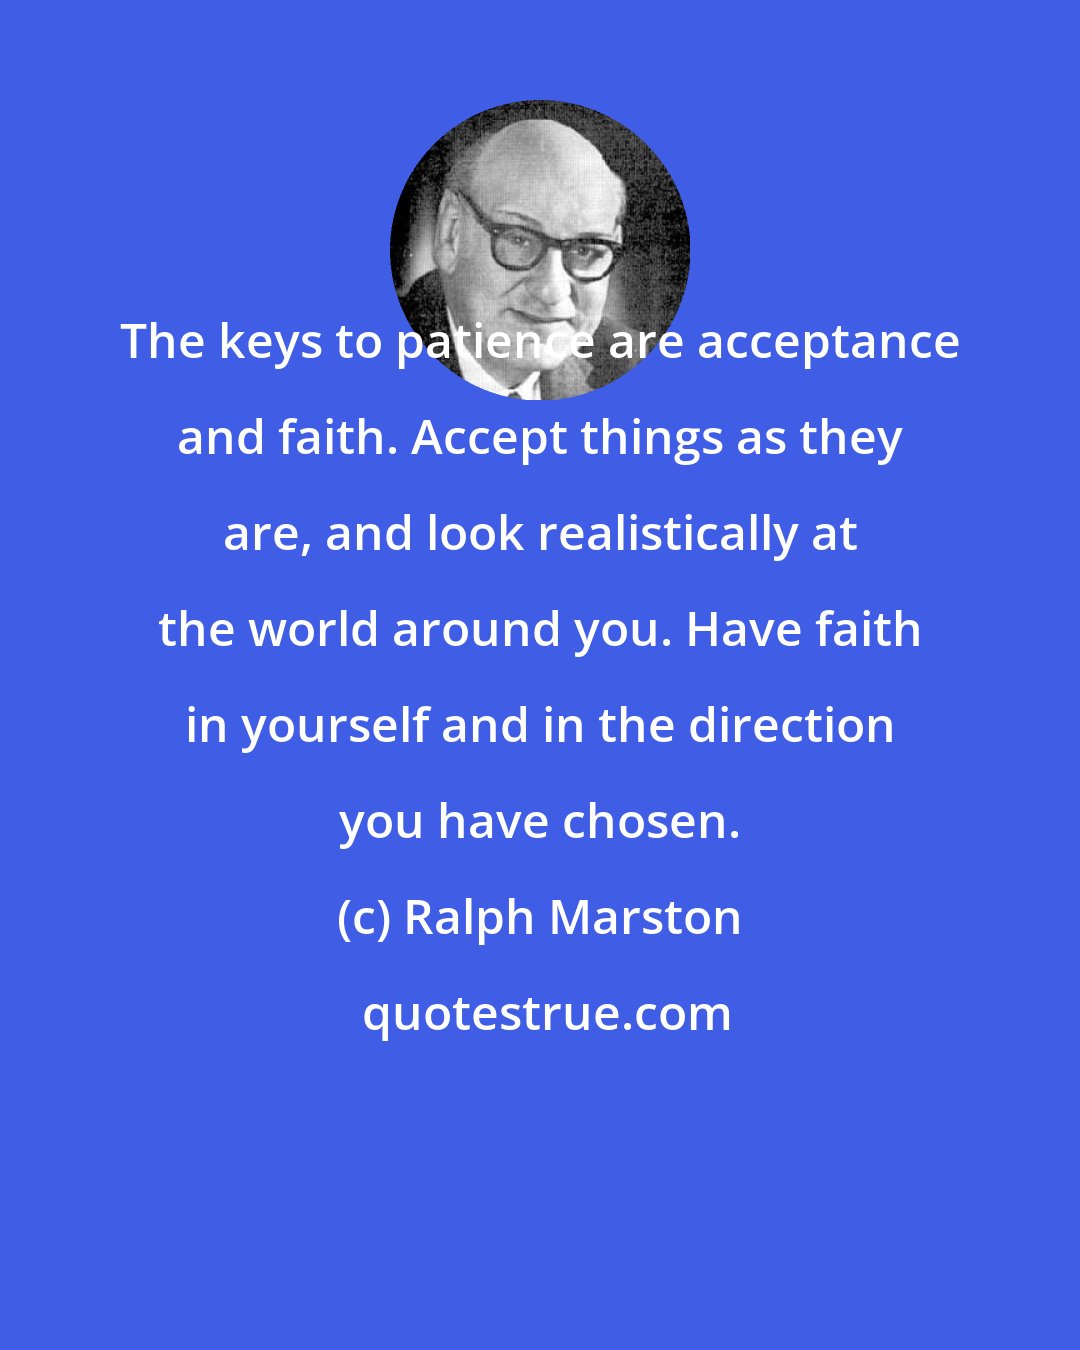 Ralph Marston: The keys to patience are acceptance and faith. Accept things as they are, and look realistically at the world around you. Have faith in yourself and in the direction you have chosen.